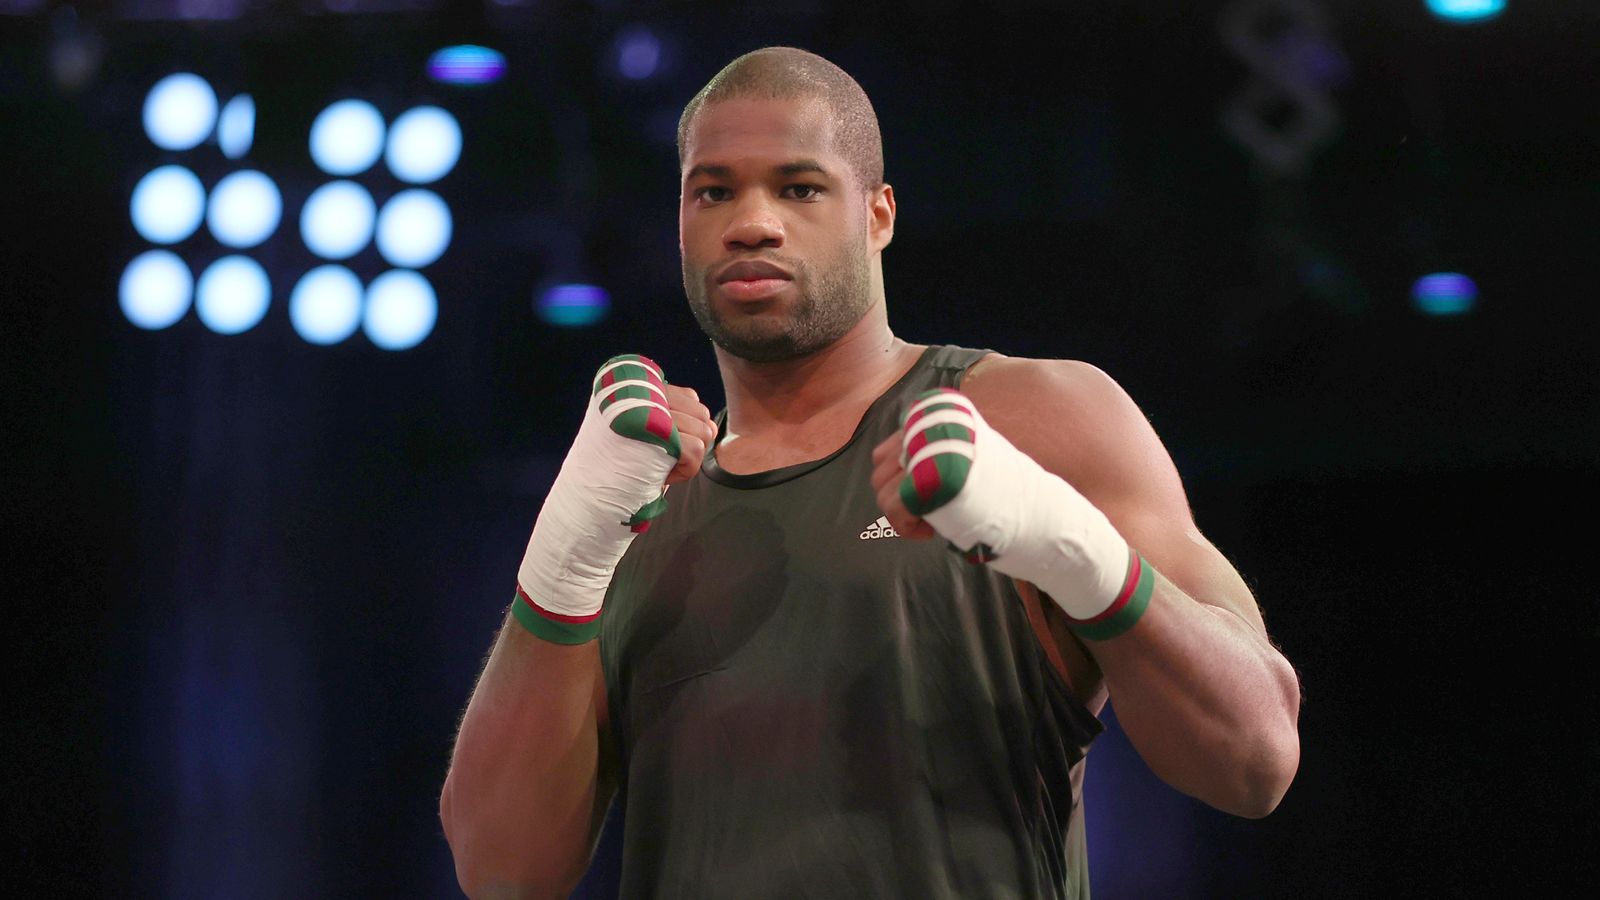 Daniel Dubois will have his first world title fight against Oleksandr Usyk